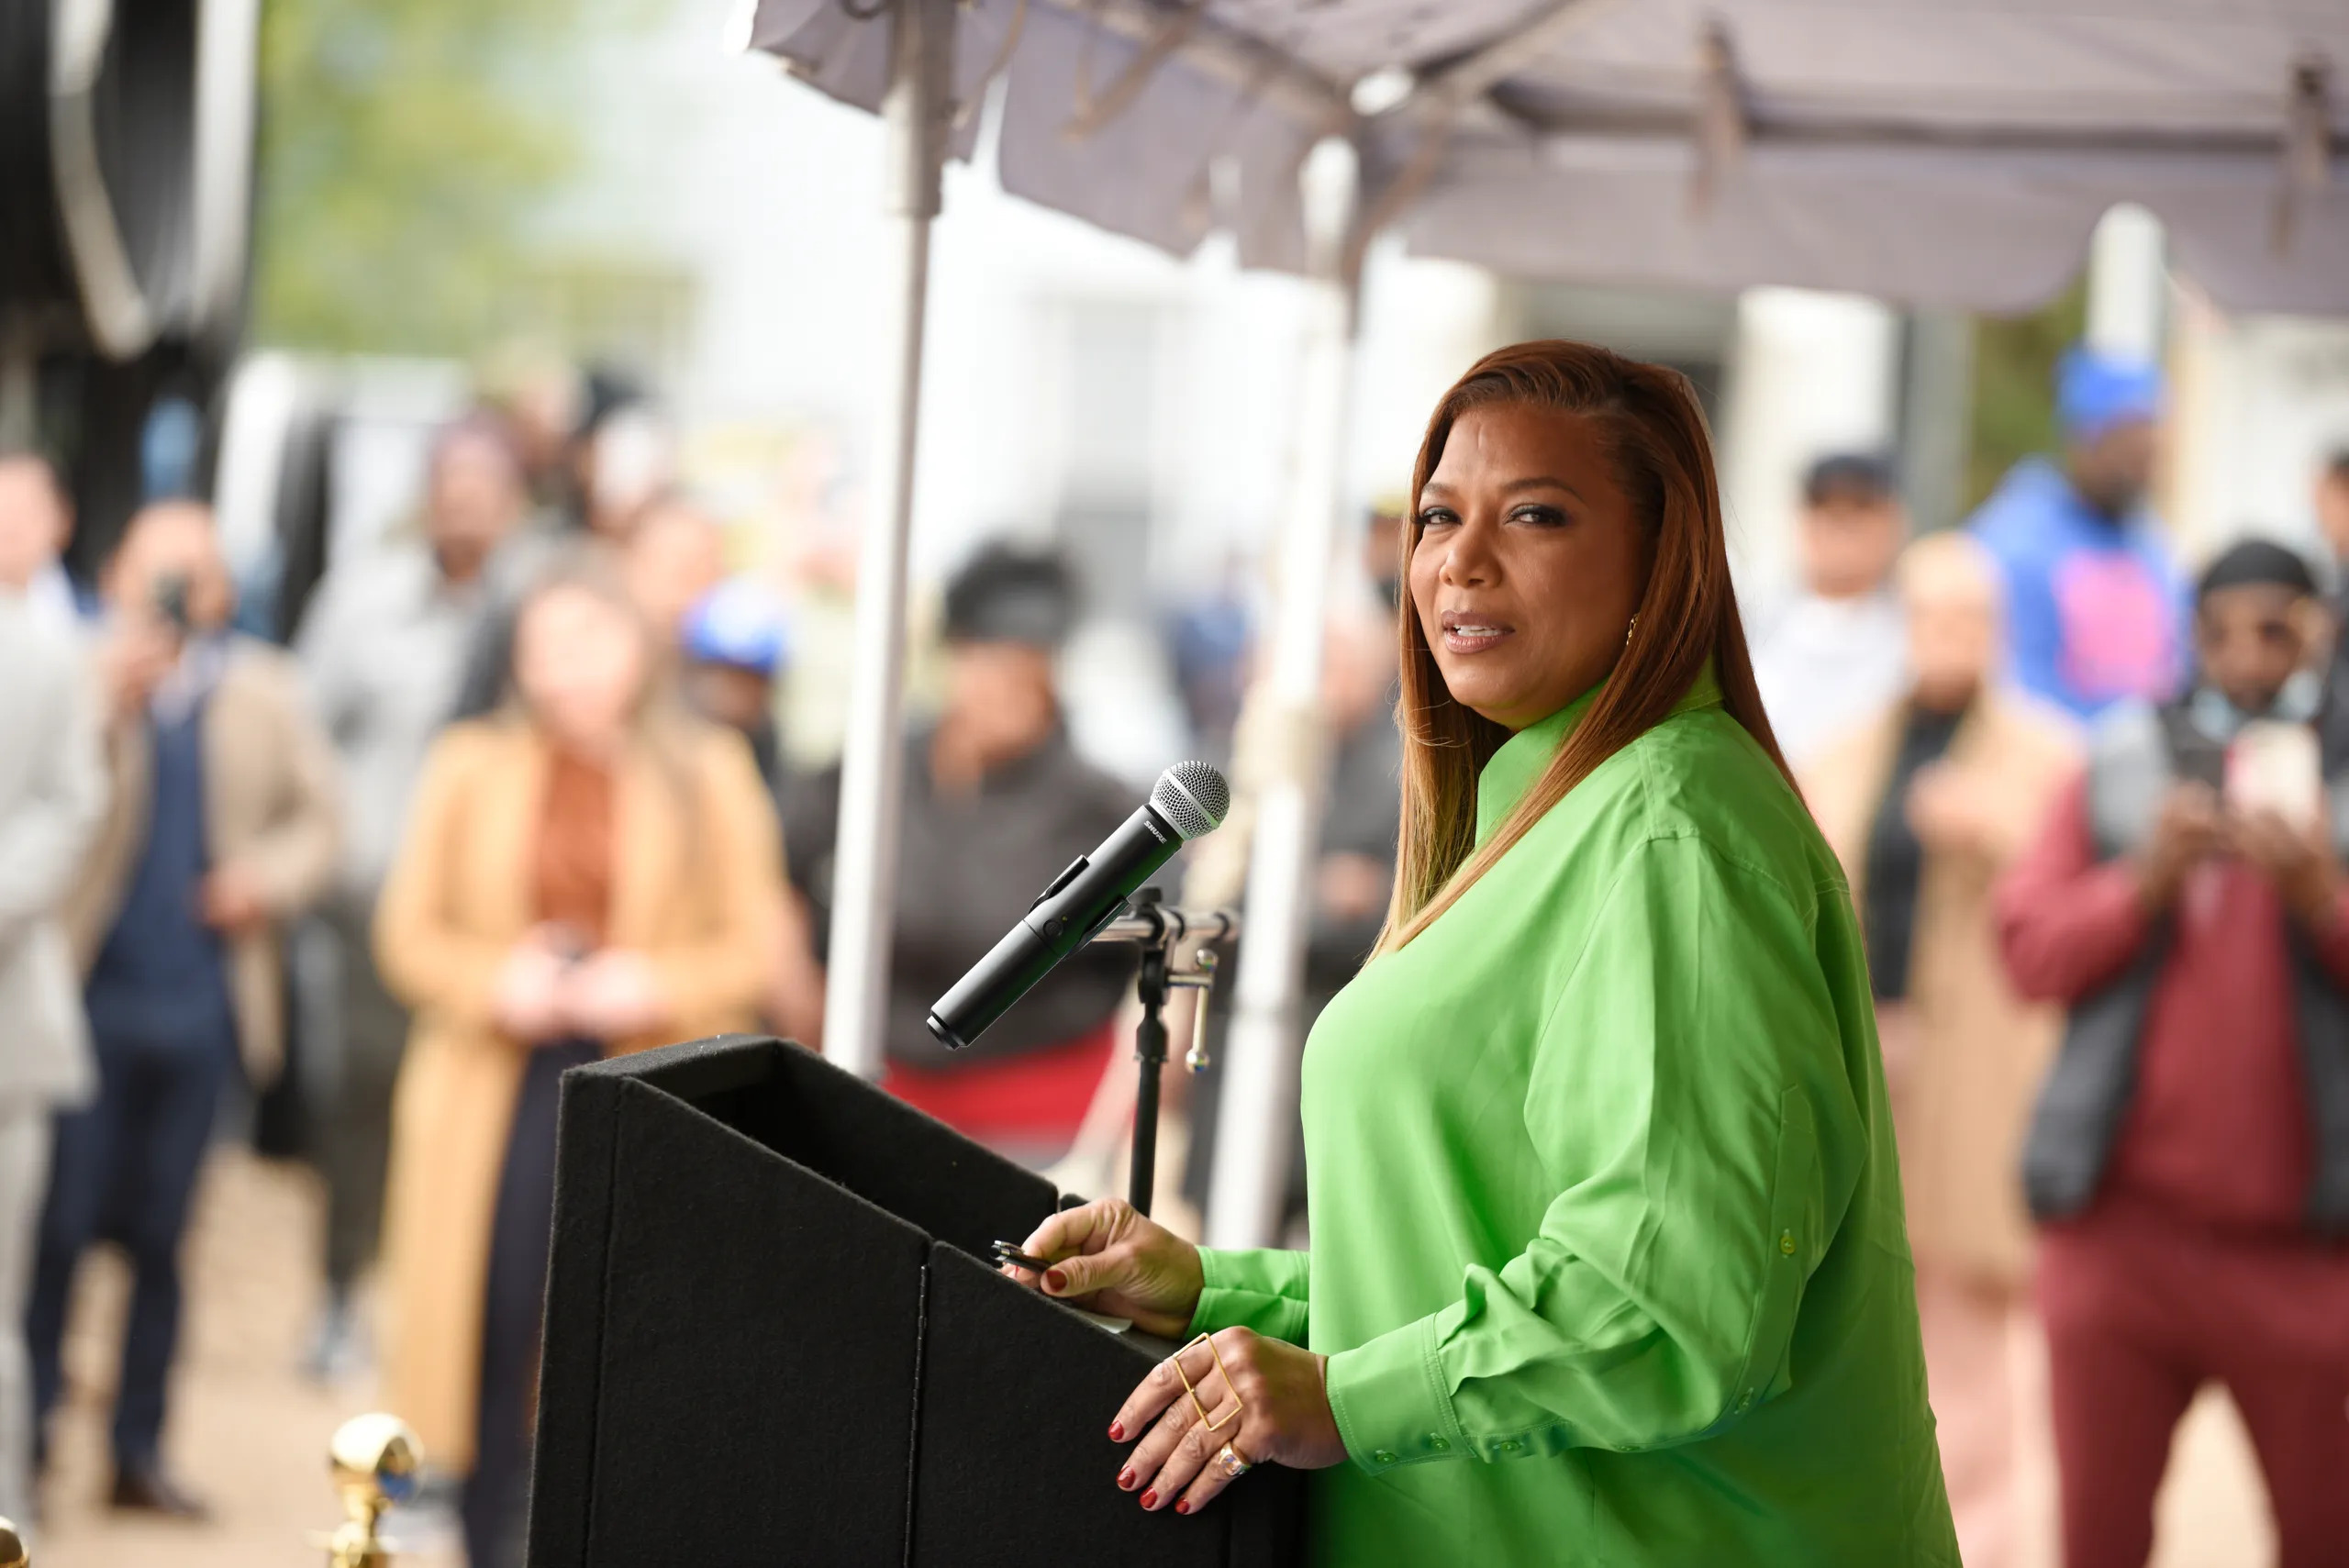 As Latifah spoke, pipes, construction equipment and bulldozers filled the development plot, contained inside South 16th Street, South 17th Street, 19th Avenue and Springfield Avenue. The Newark Art Museum has created a netted art installation around the chain-link fence that features portraits of local artists and others whom neighbours nominated.